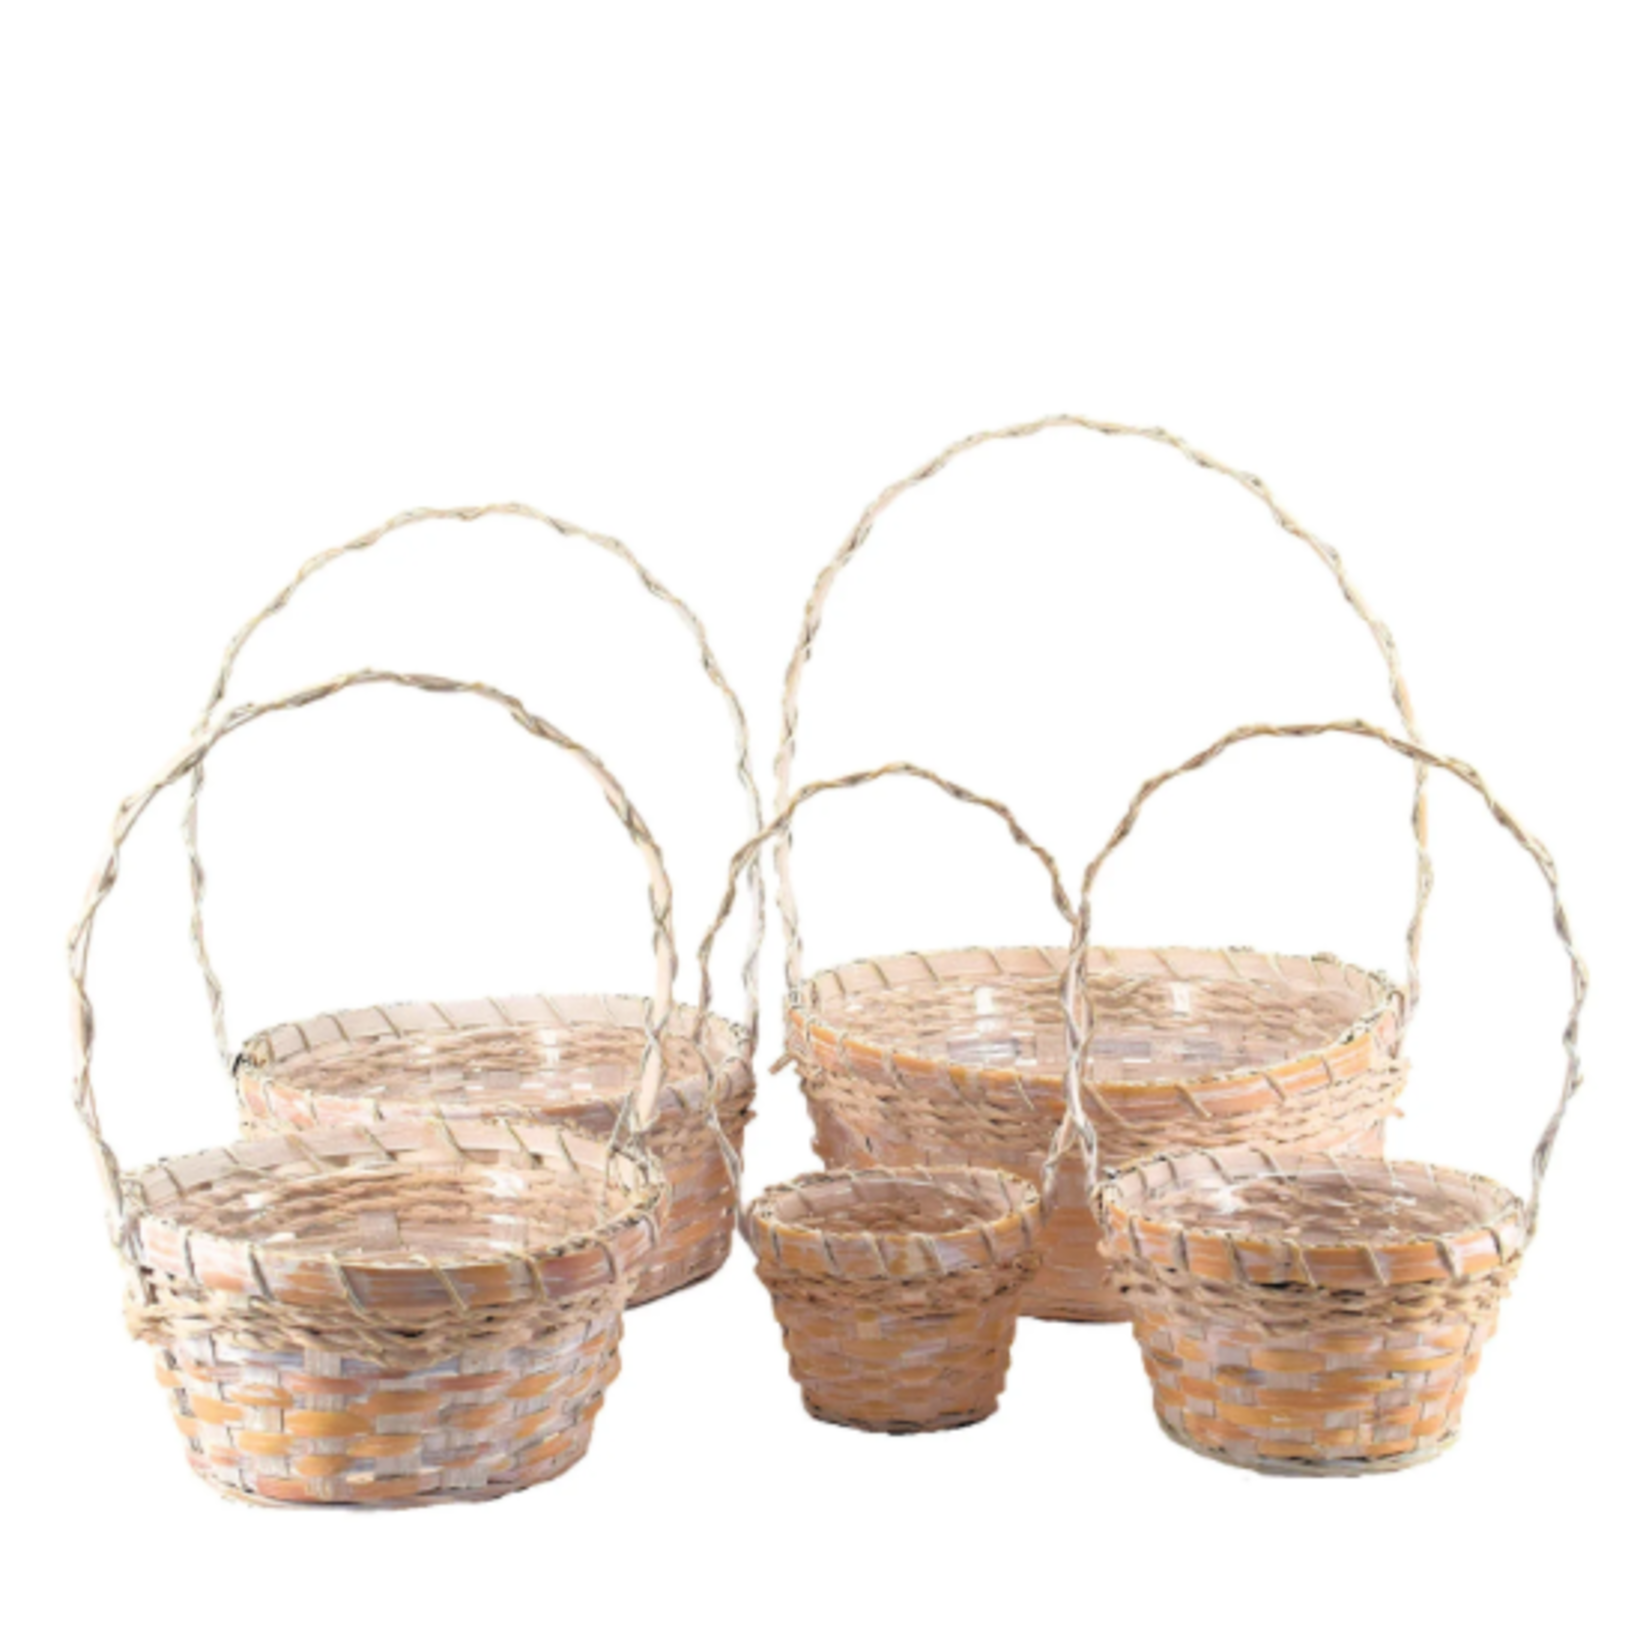 SET OF 5 WHITE RUSTIC BASKETS